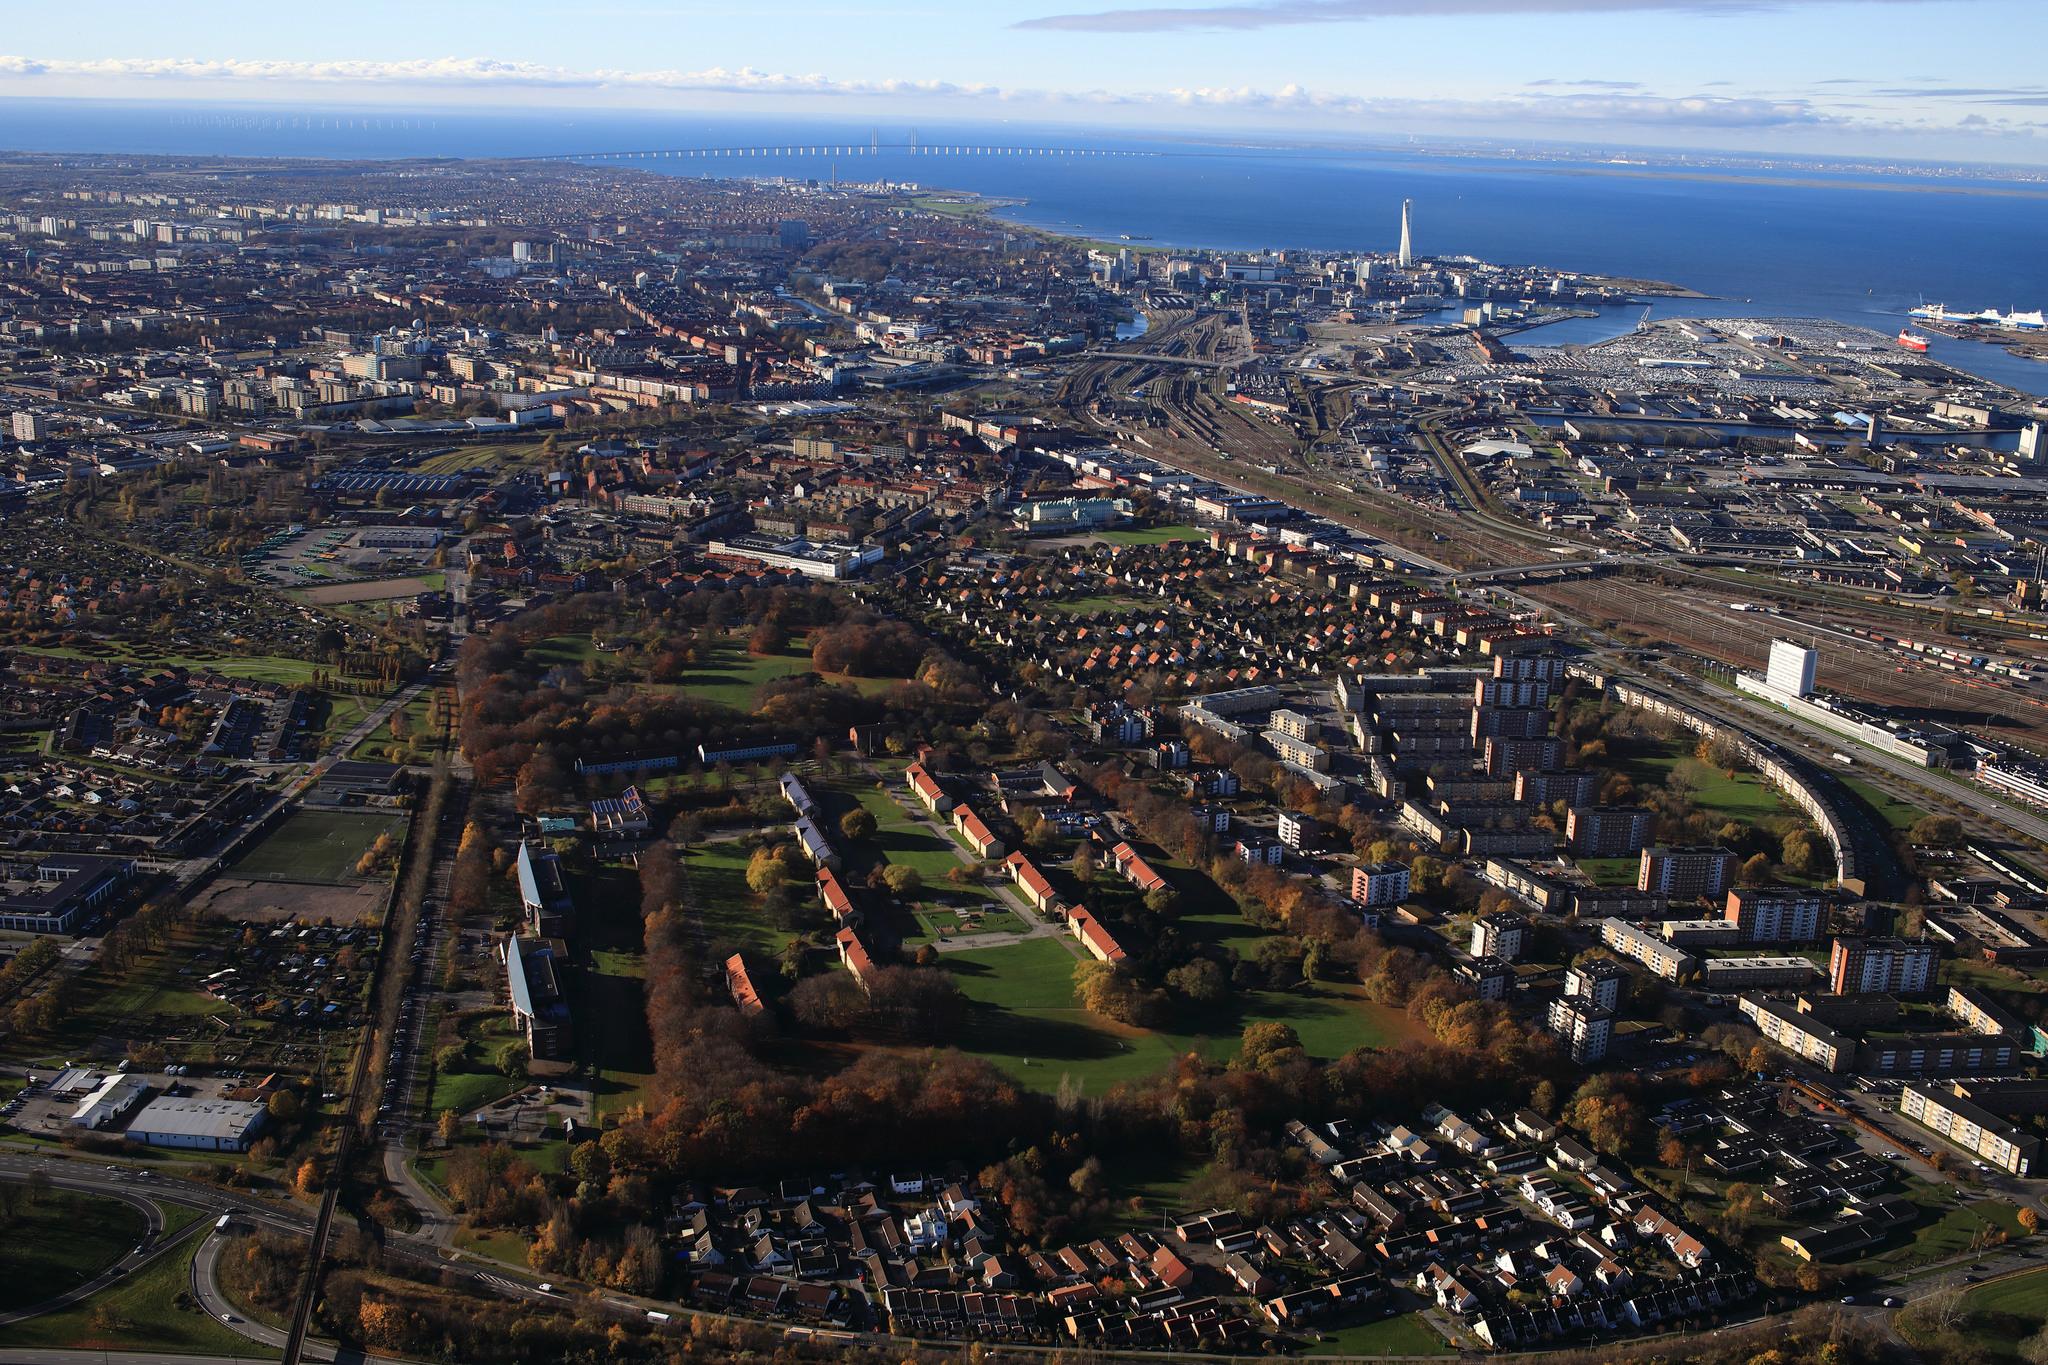 Aerial view of the city Malmö, with Sege Park in the middle. This redevelopment is helping Malmö towards a greener future.